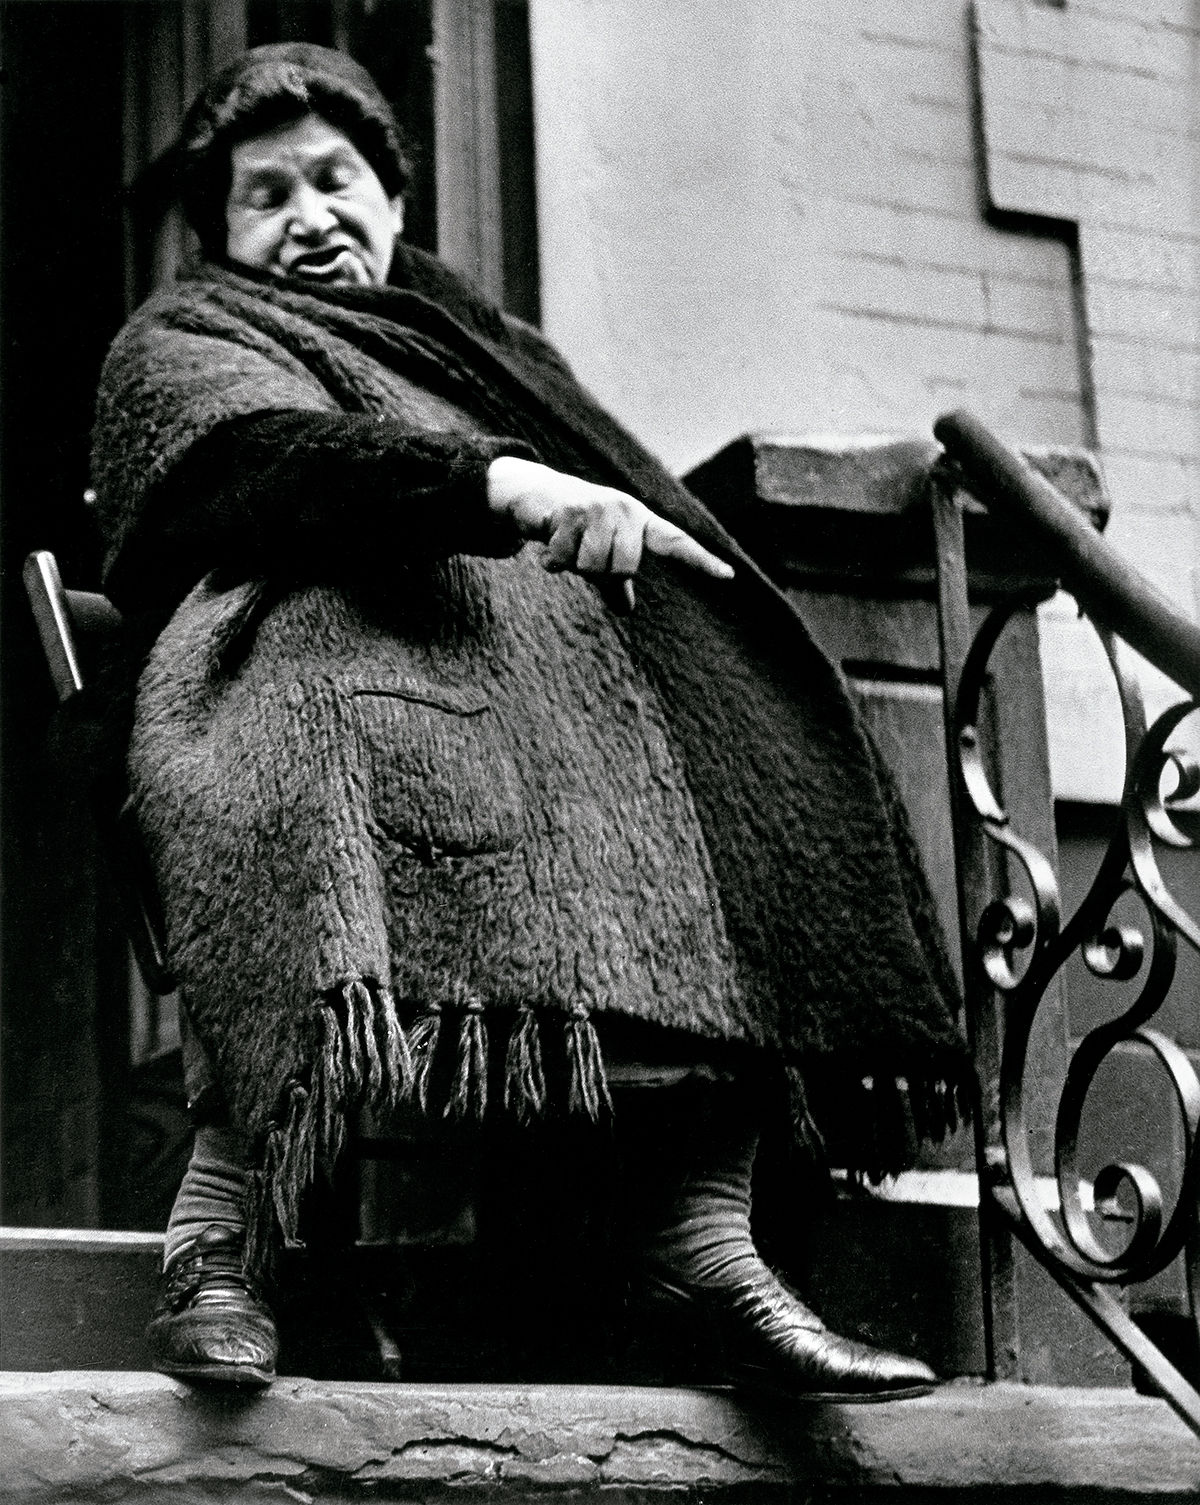 Lower East Side (Big woman pointing), New York © The Lisette Model Foundation Inc. © COLECCIONES Fundación MAPFRE